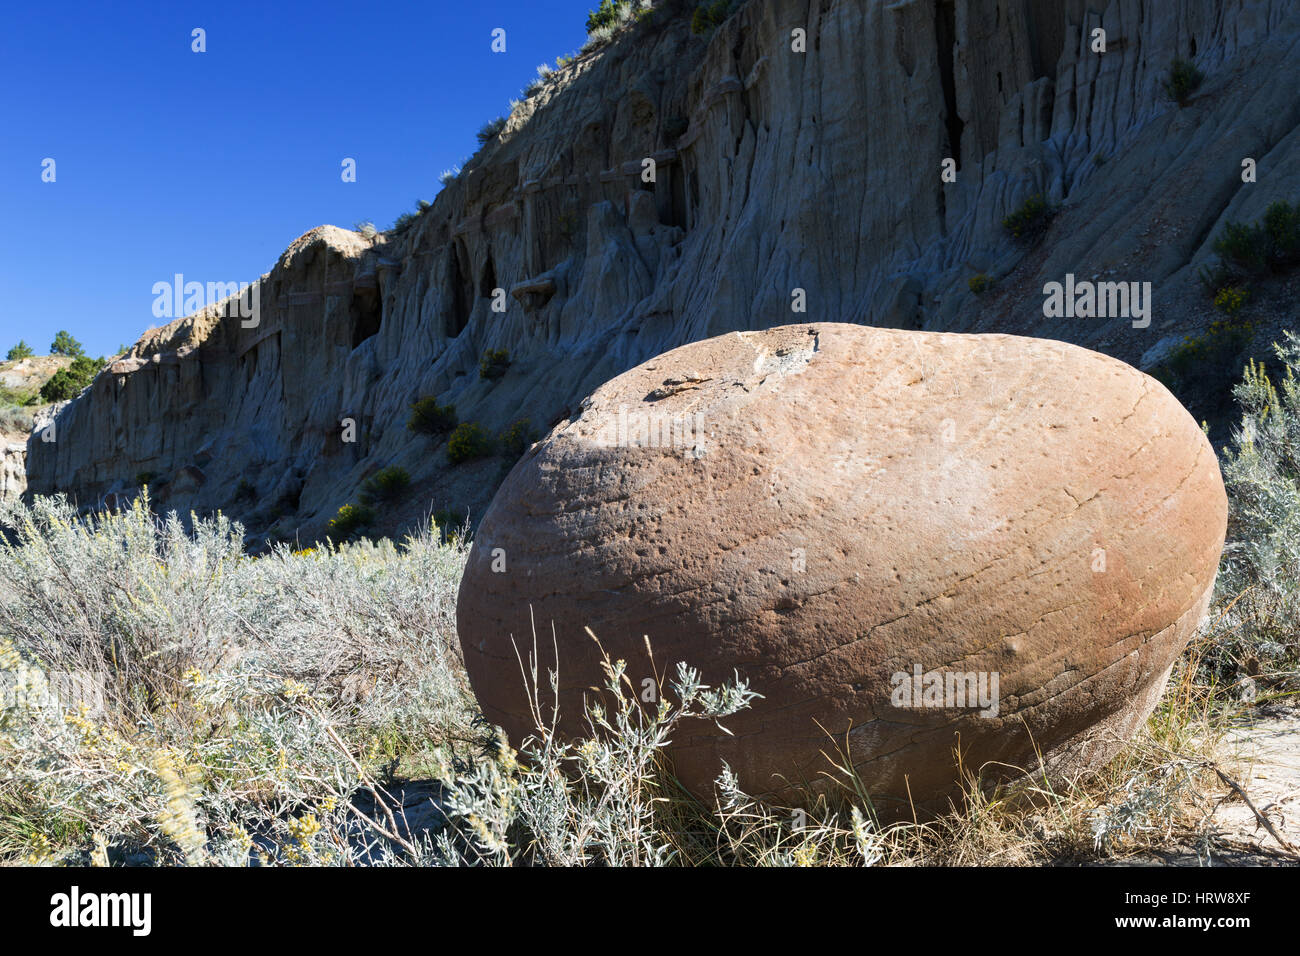 Cannon Ball Concretions, Theodore Roosevelt National Park, ND, USA Stock Photo